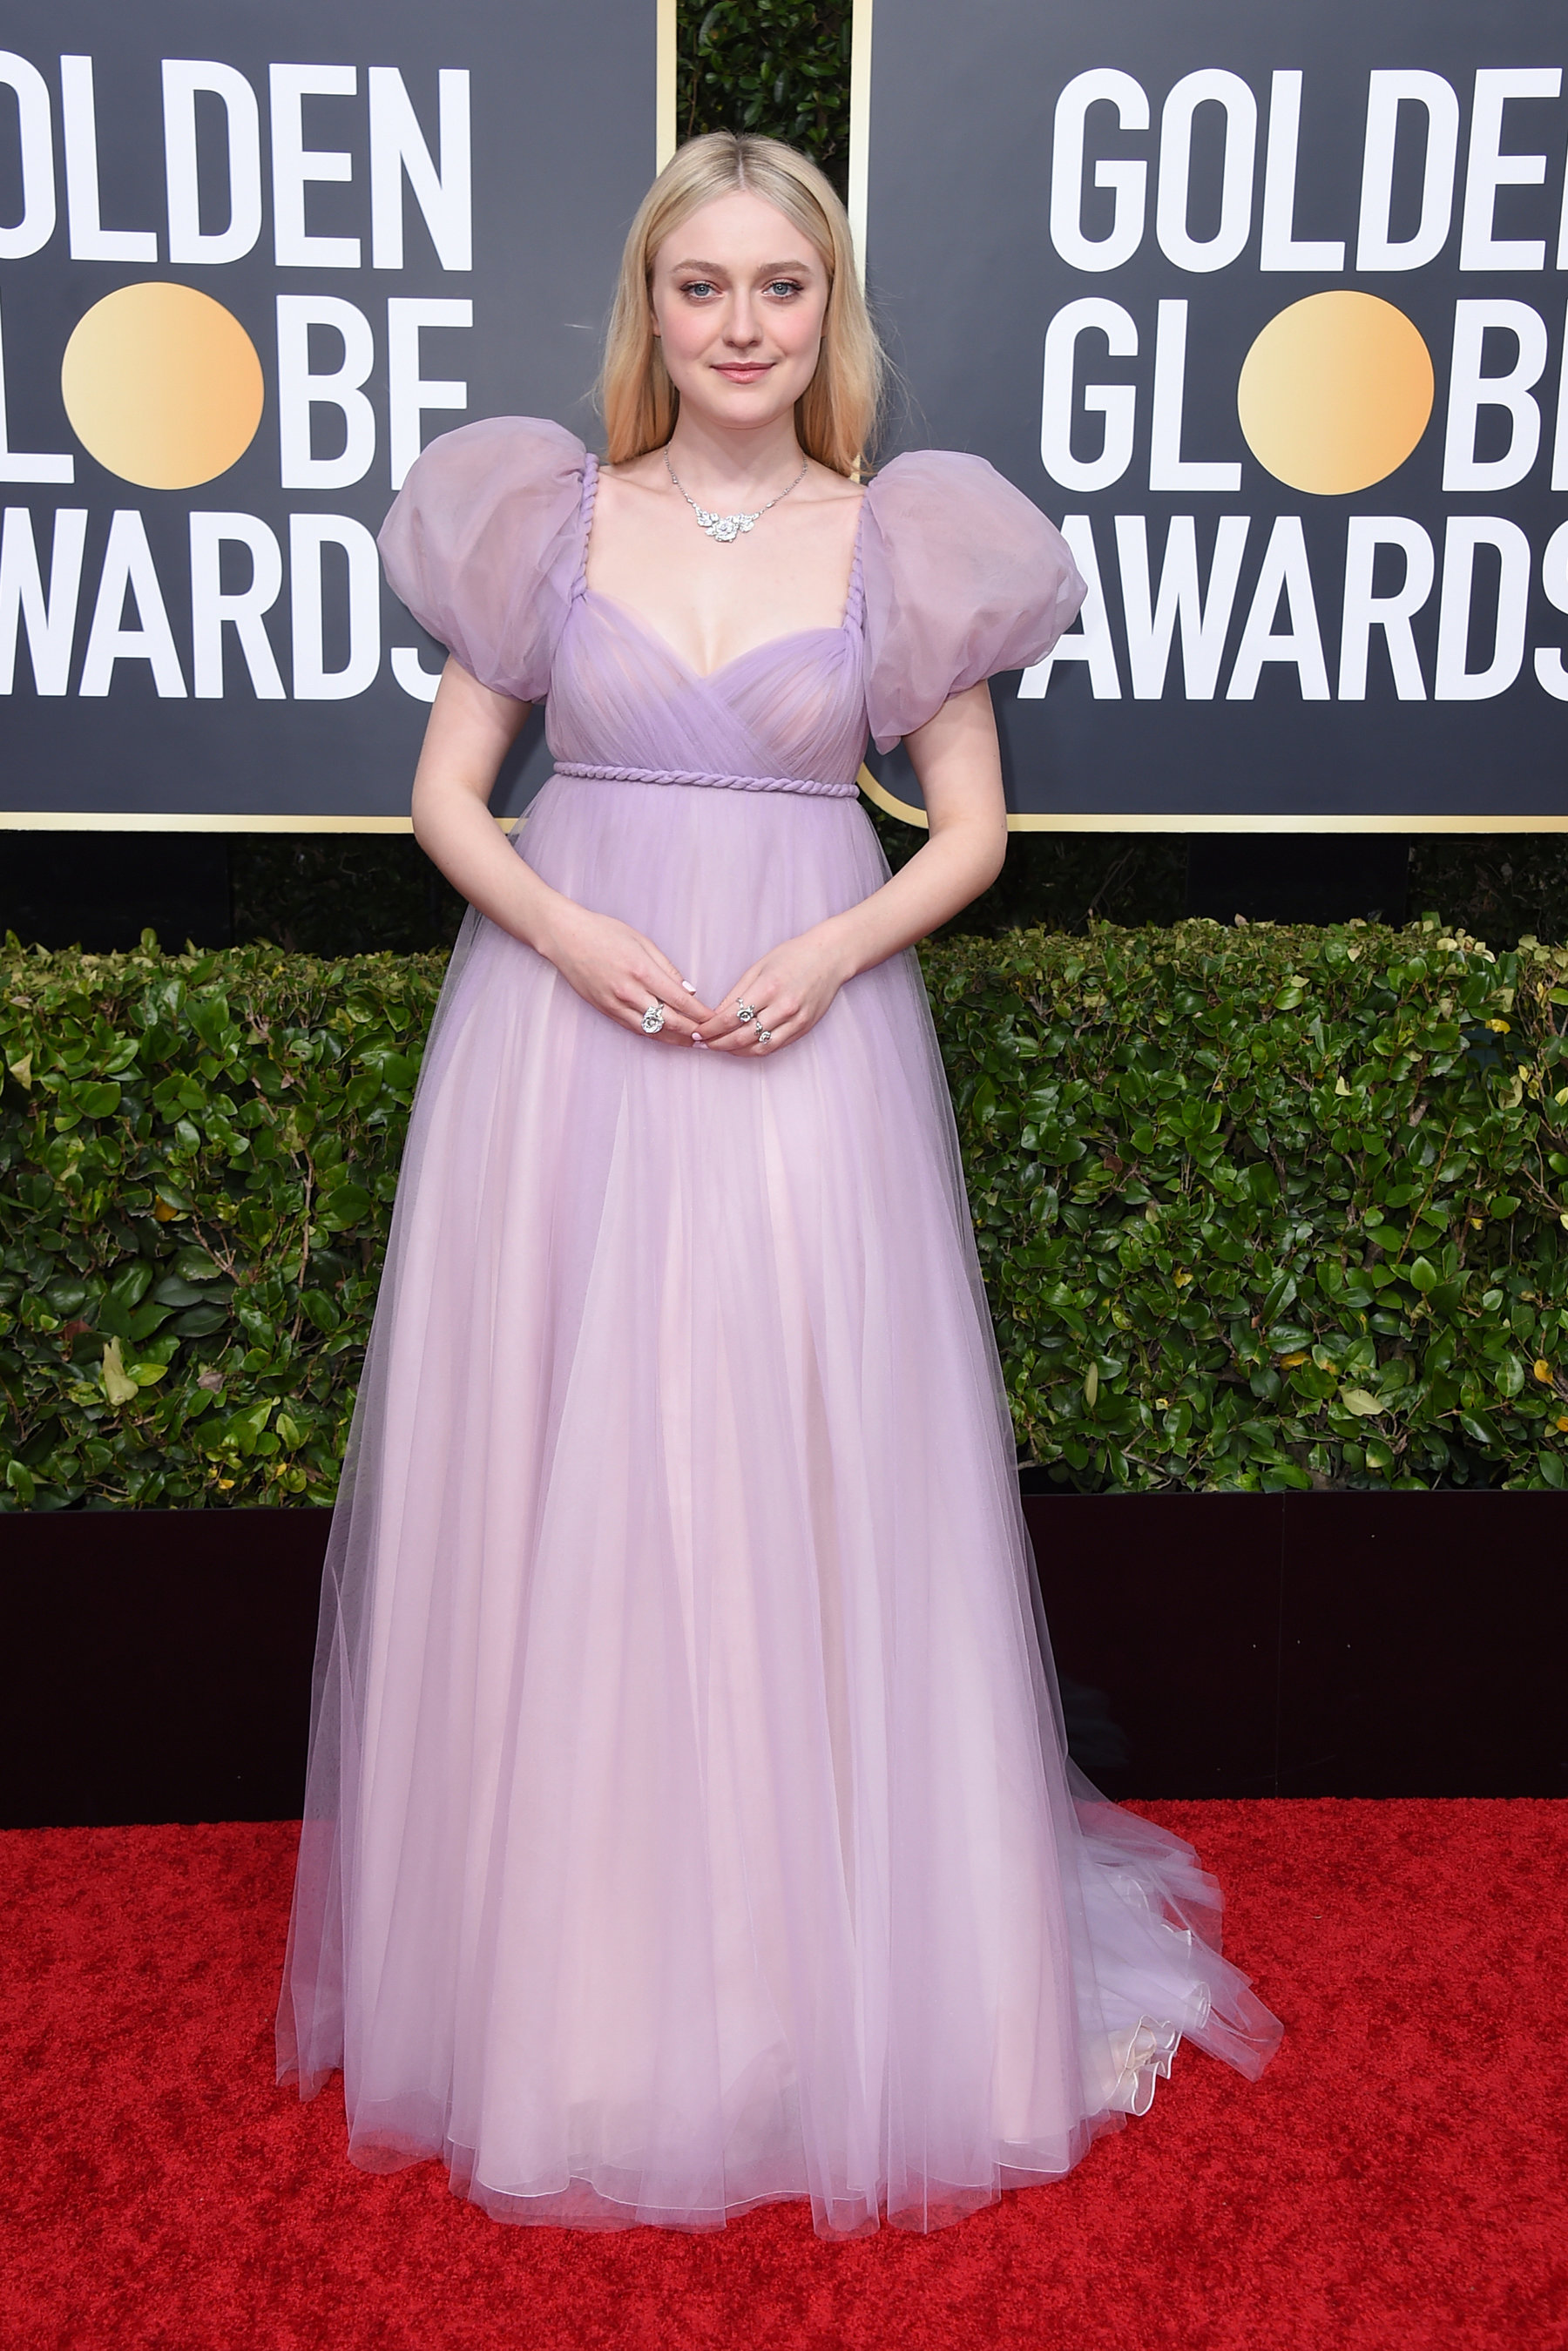 Golden Globes Red Carpet Fashion At The Awards New